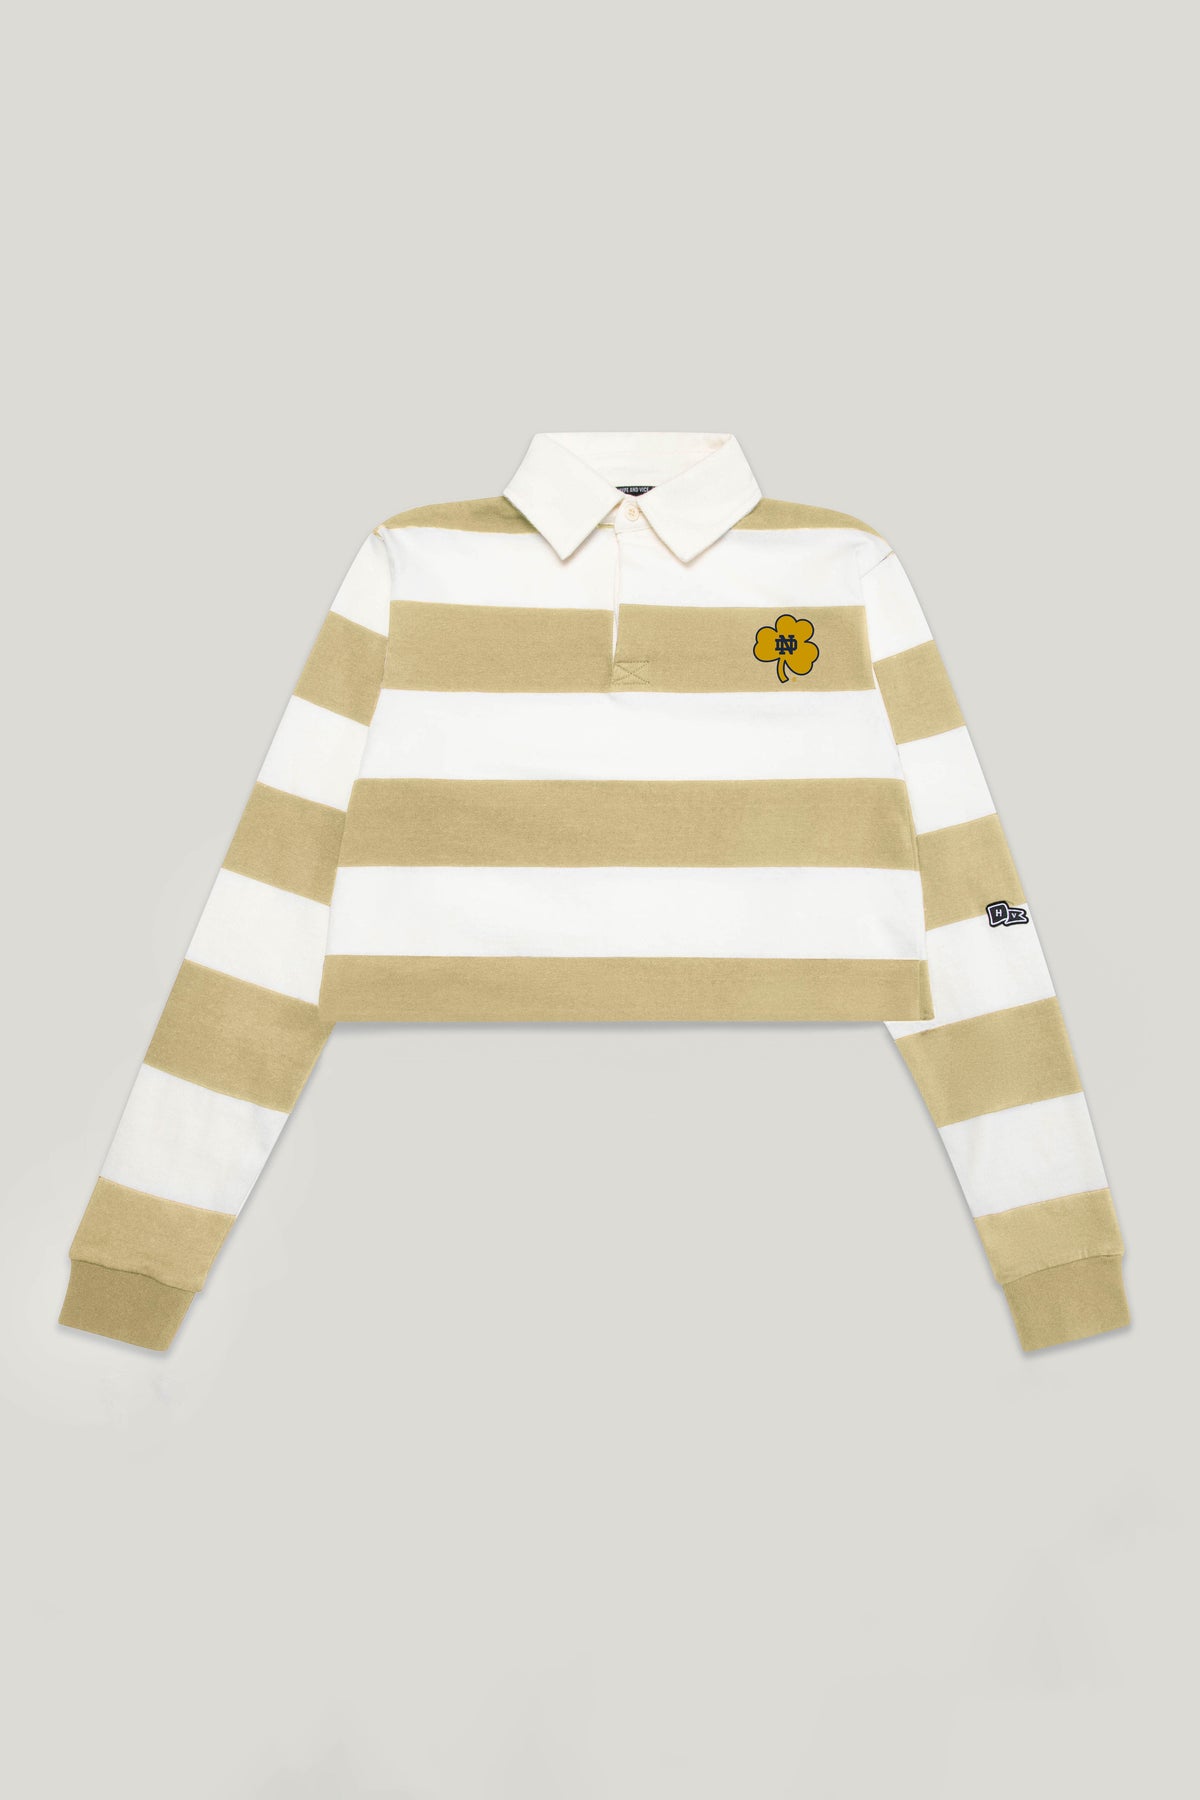 Notre Dame Rugby Top